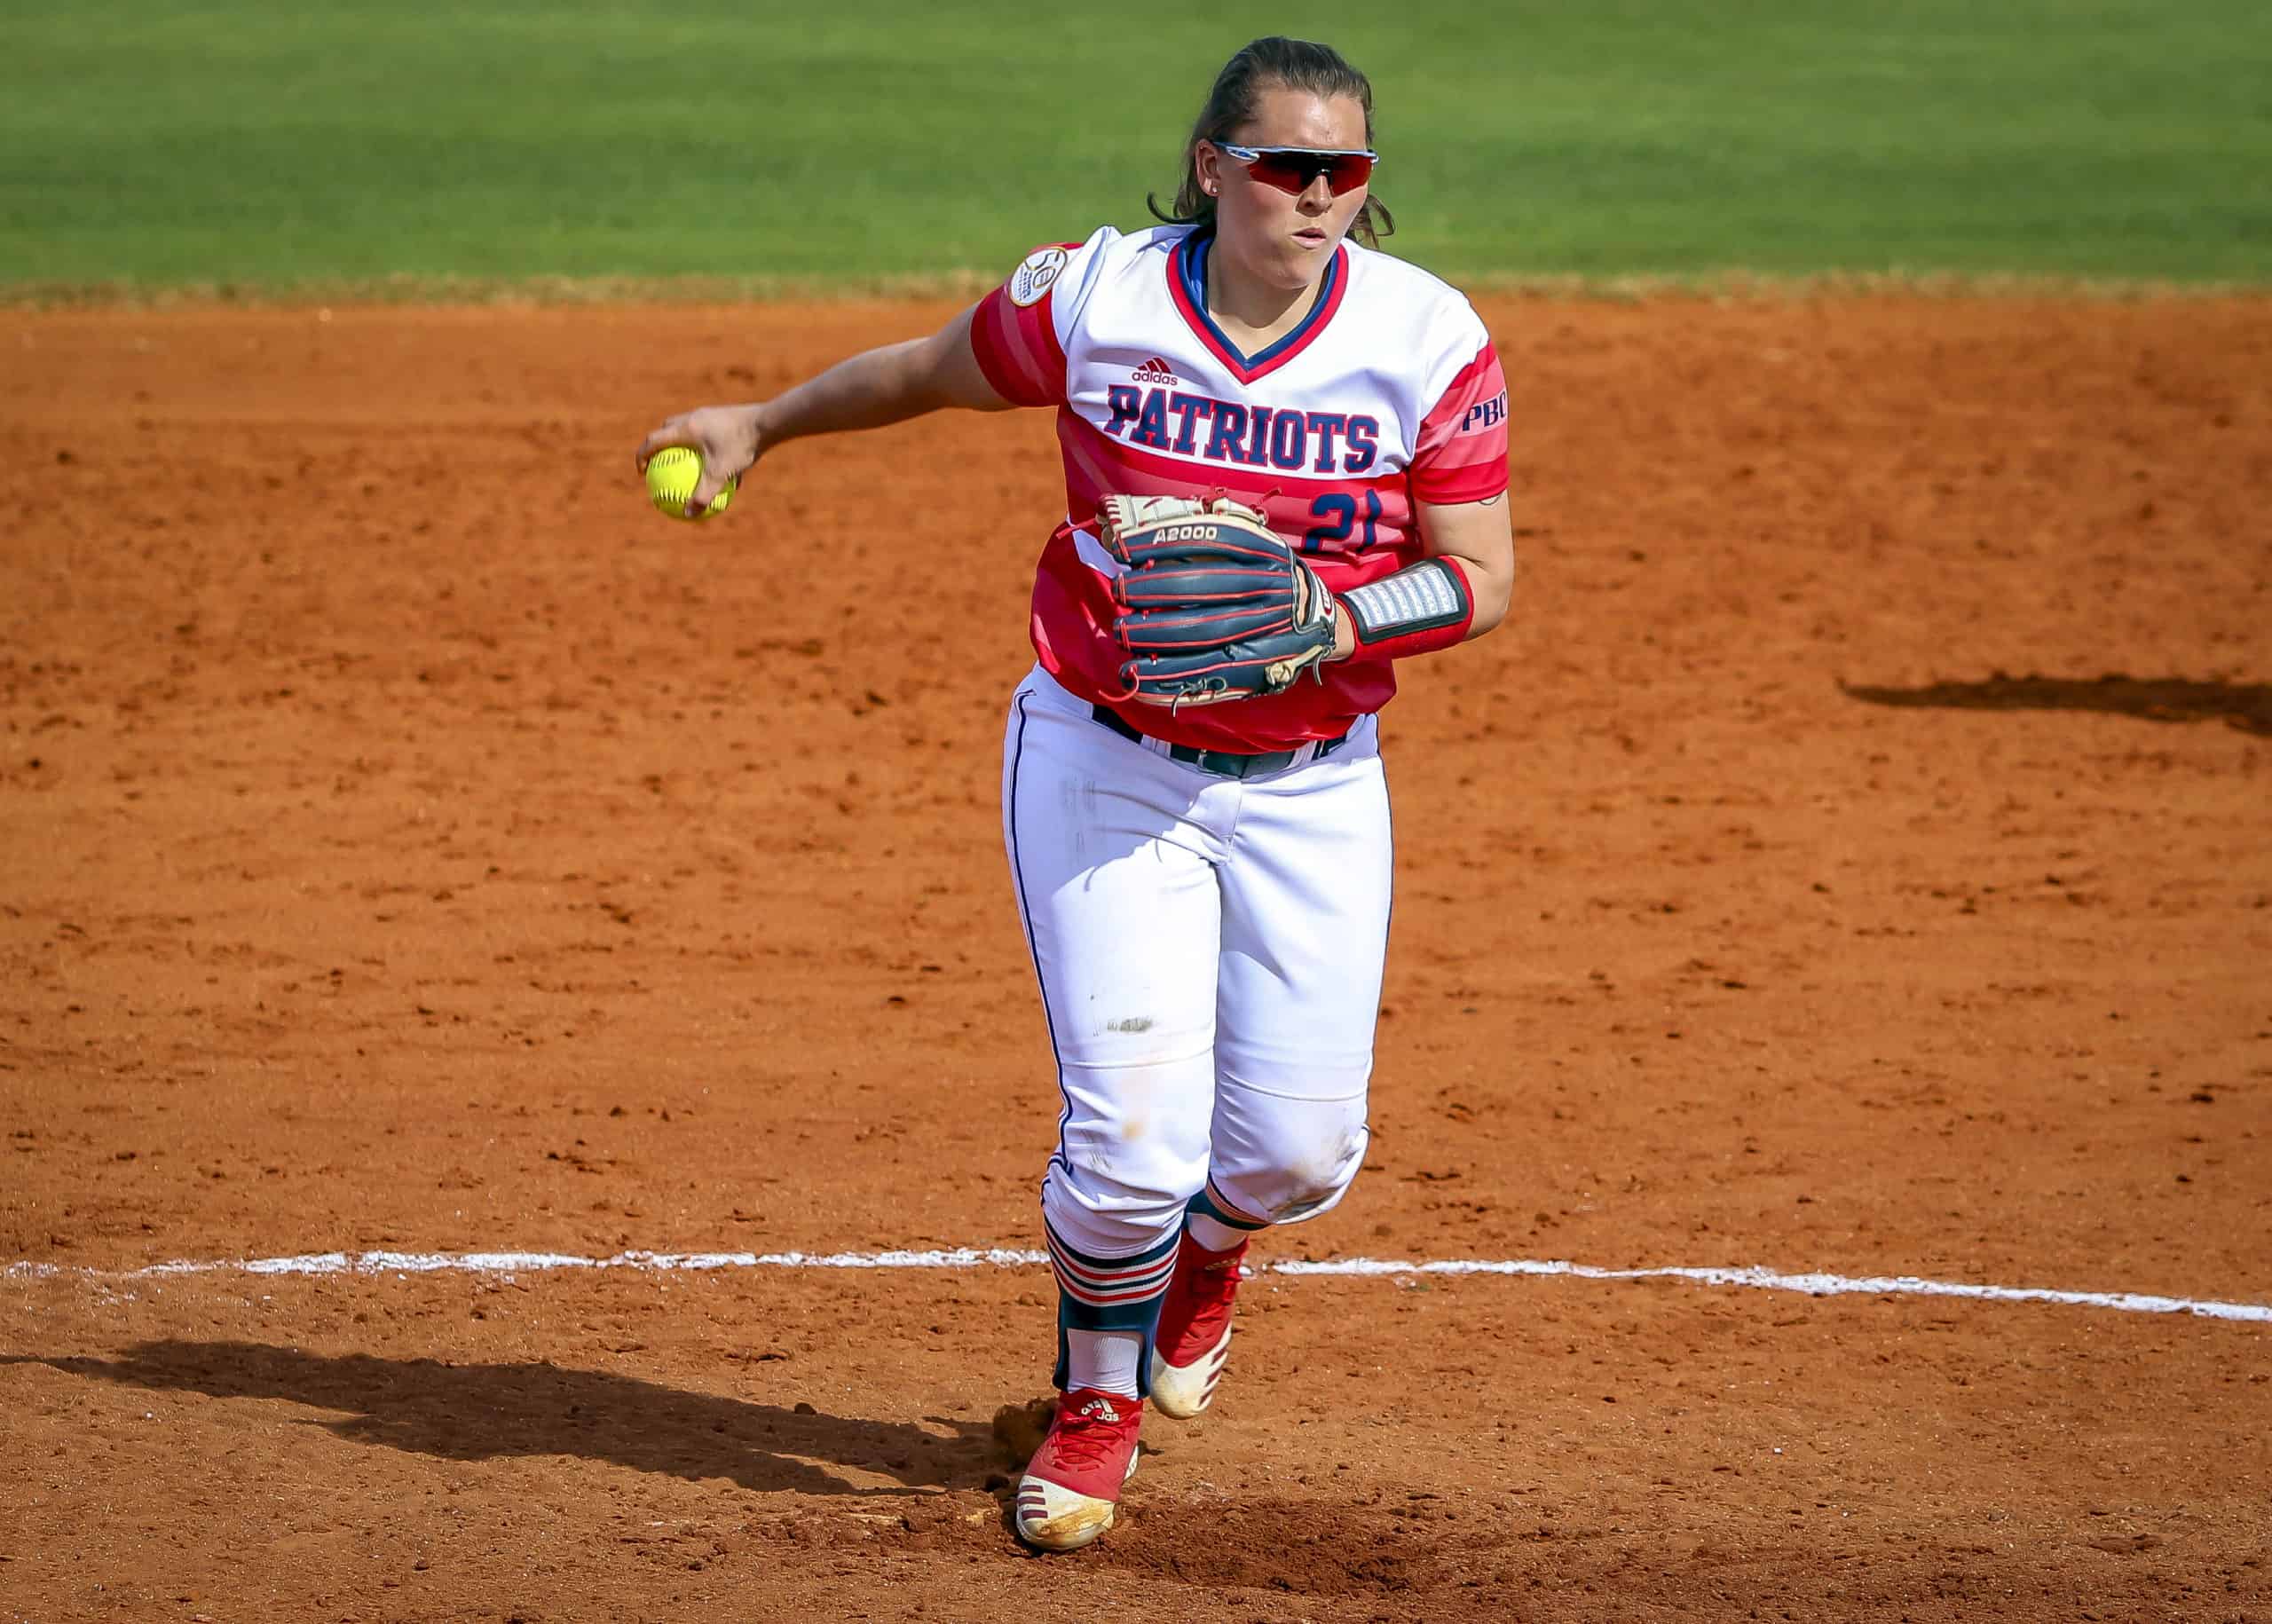 From Fakenham to Florence: Softball brought Hutchison to FMU